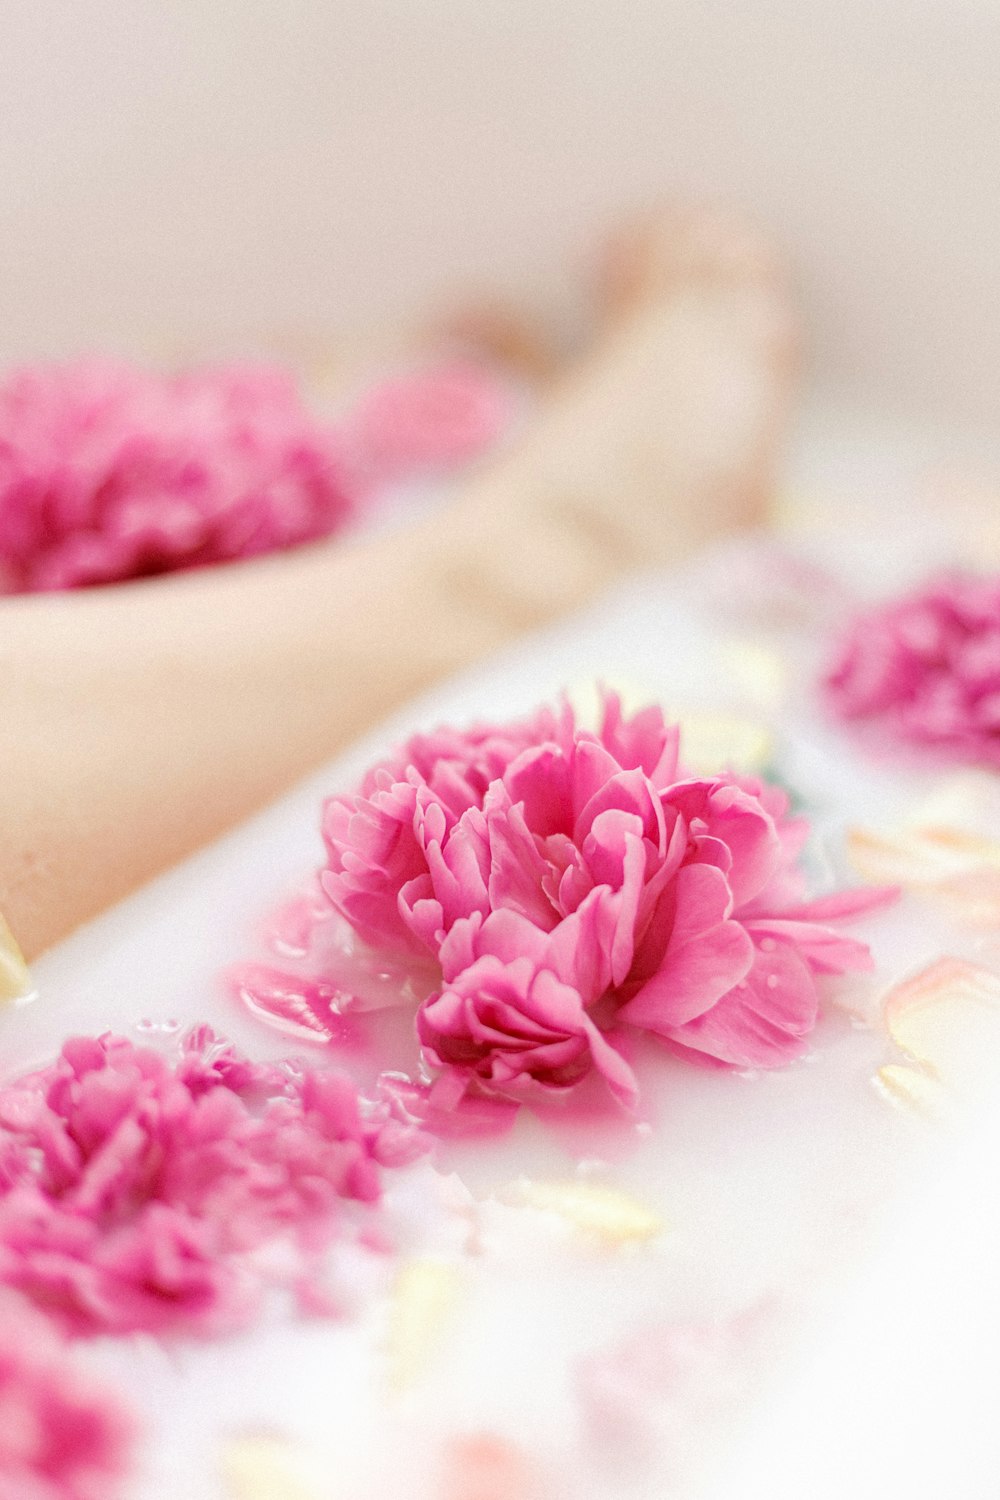 a person laying in a bath tub with pink flowers